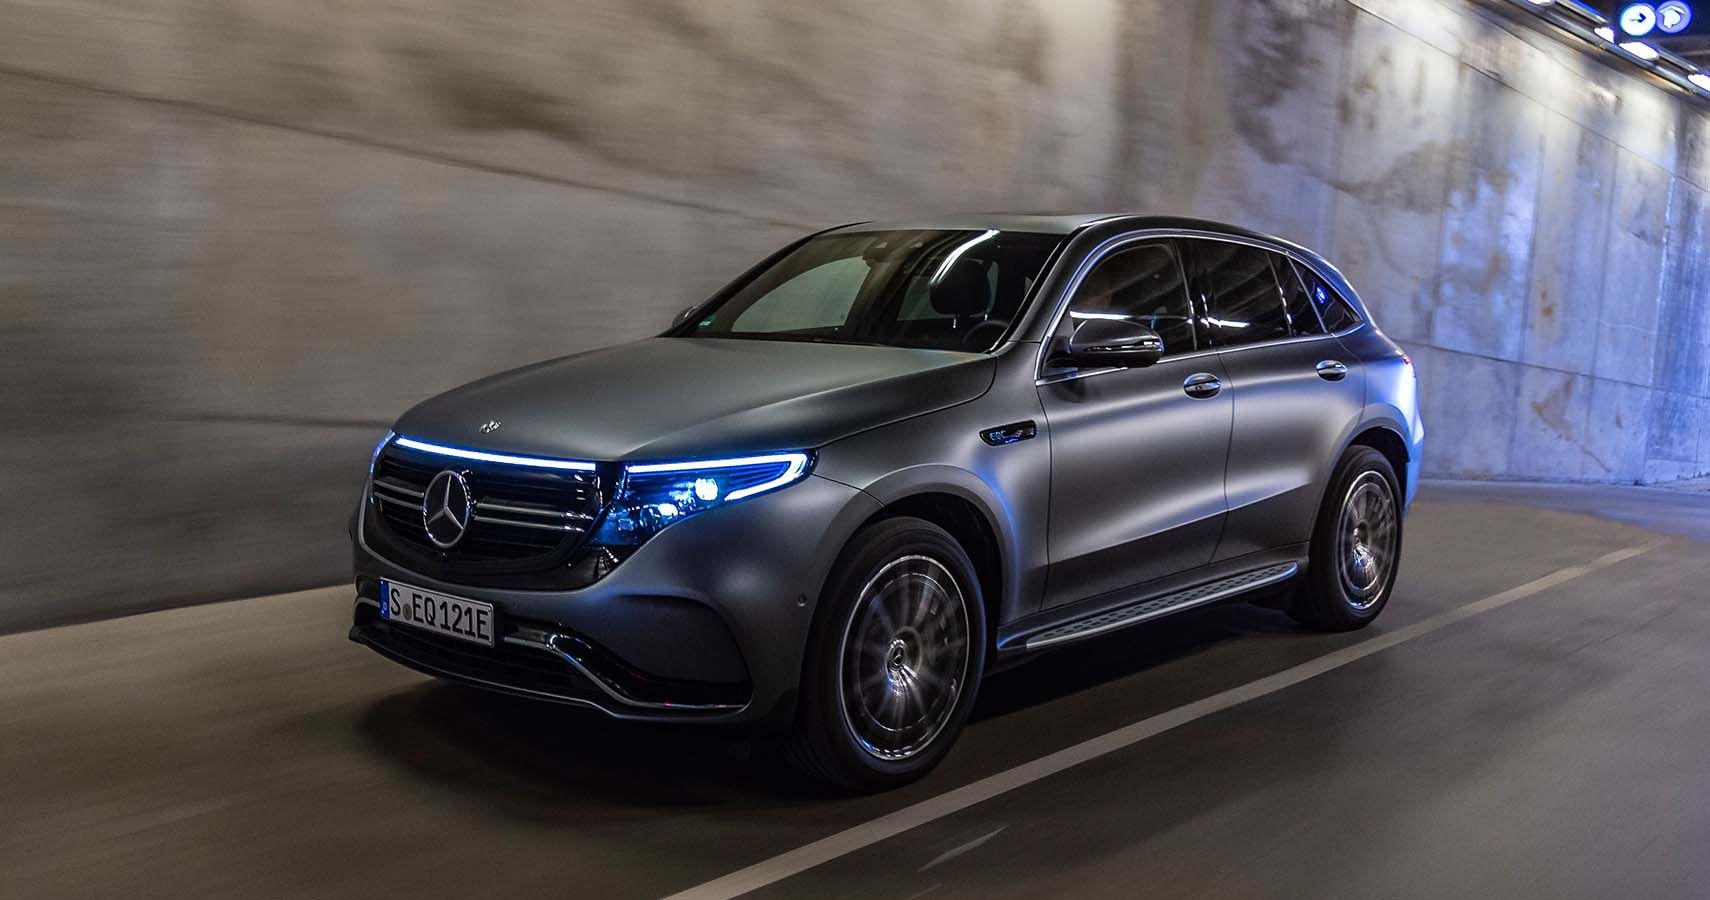 The First Of The EQ Models, The EQC Was Released In 2019 As A Compact-Sized SUV